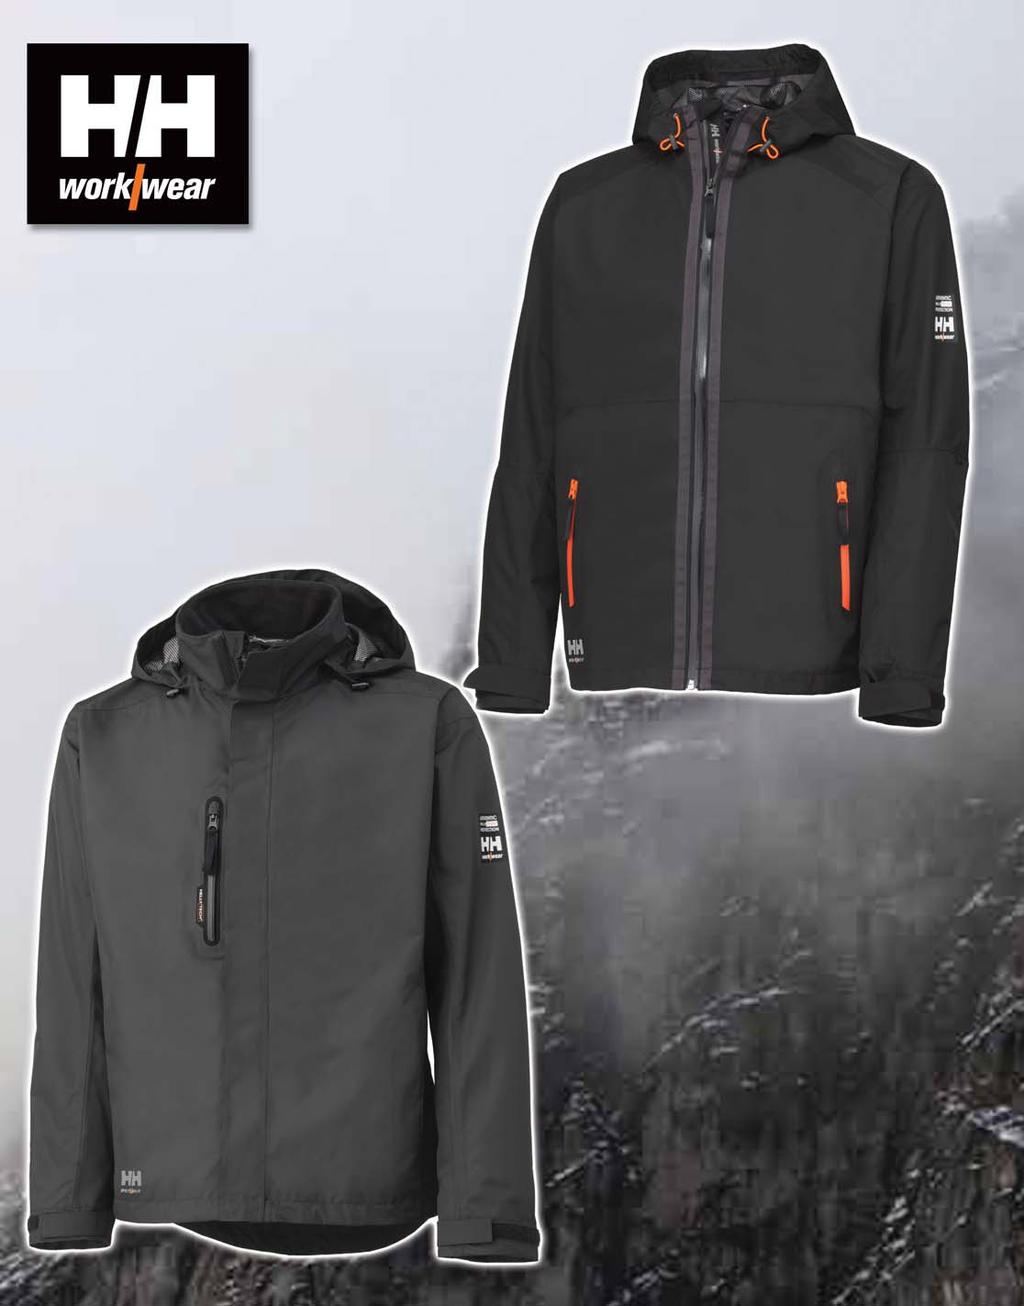 FOUL WEATHER PROTECTION 71040 BRUSSELS JACKET Helly Tech - waterproof/breathable. Lining: 100% Polyester mesh. Water repellent front zipper with inner placket. No shoulder seams.